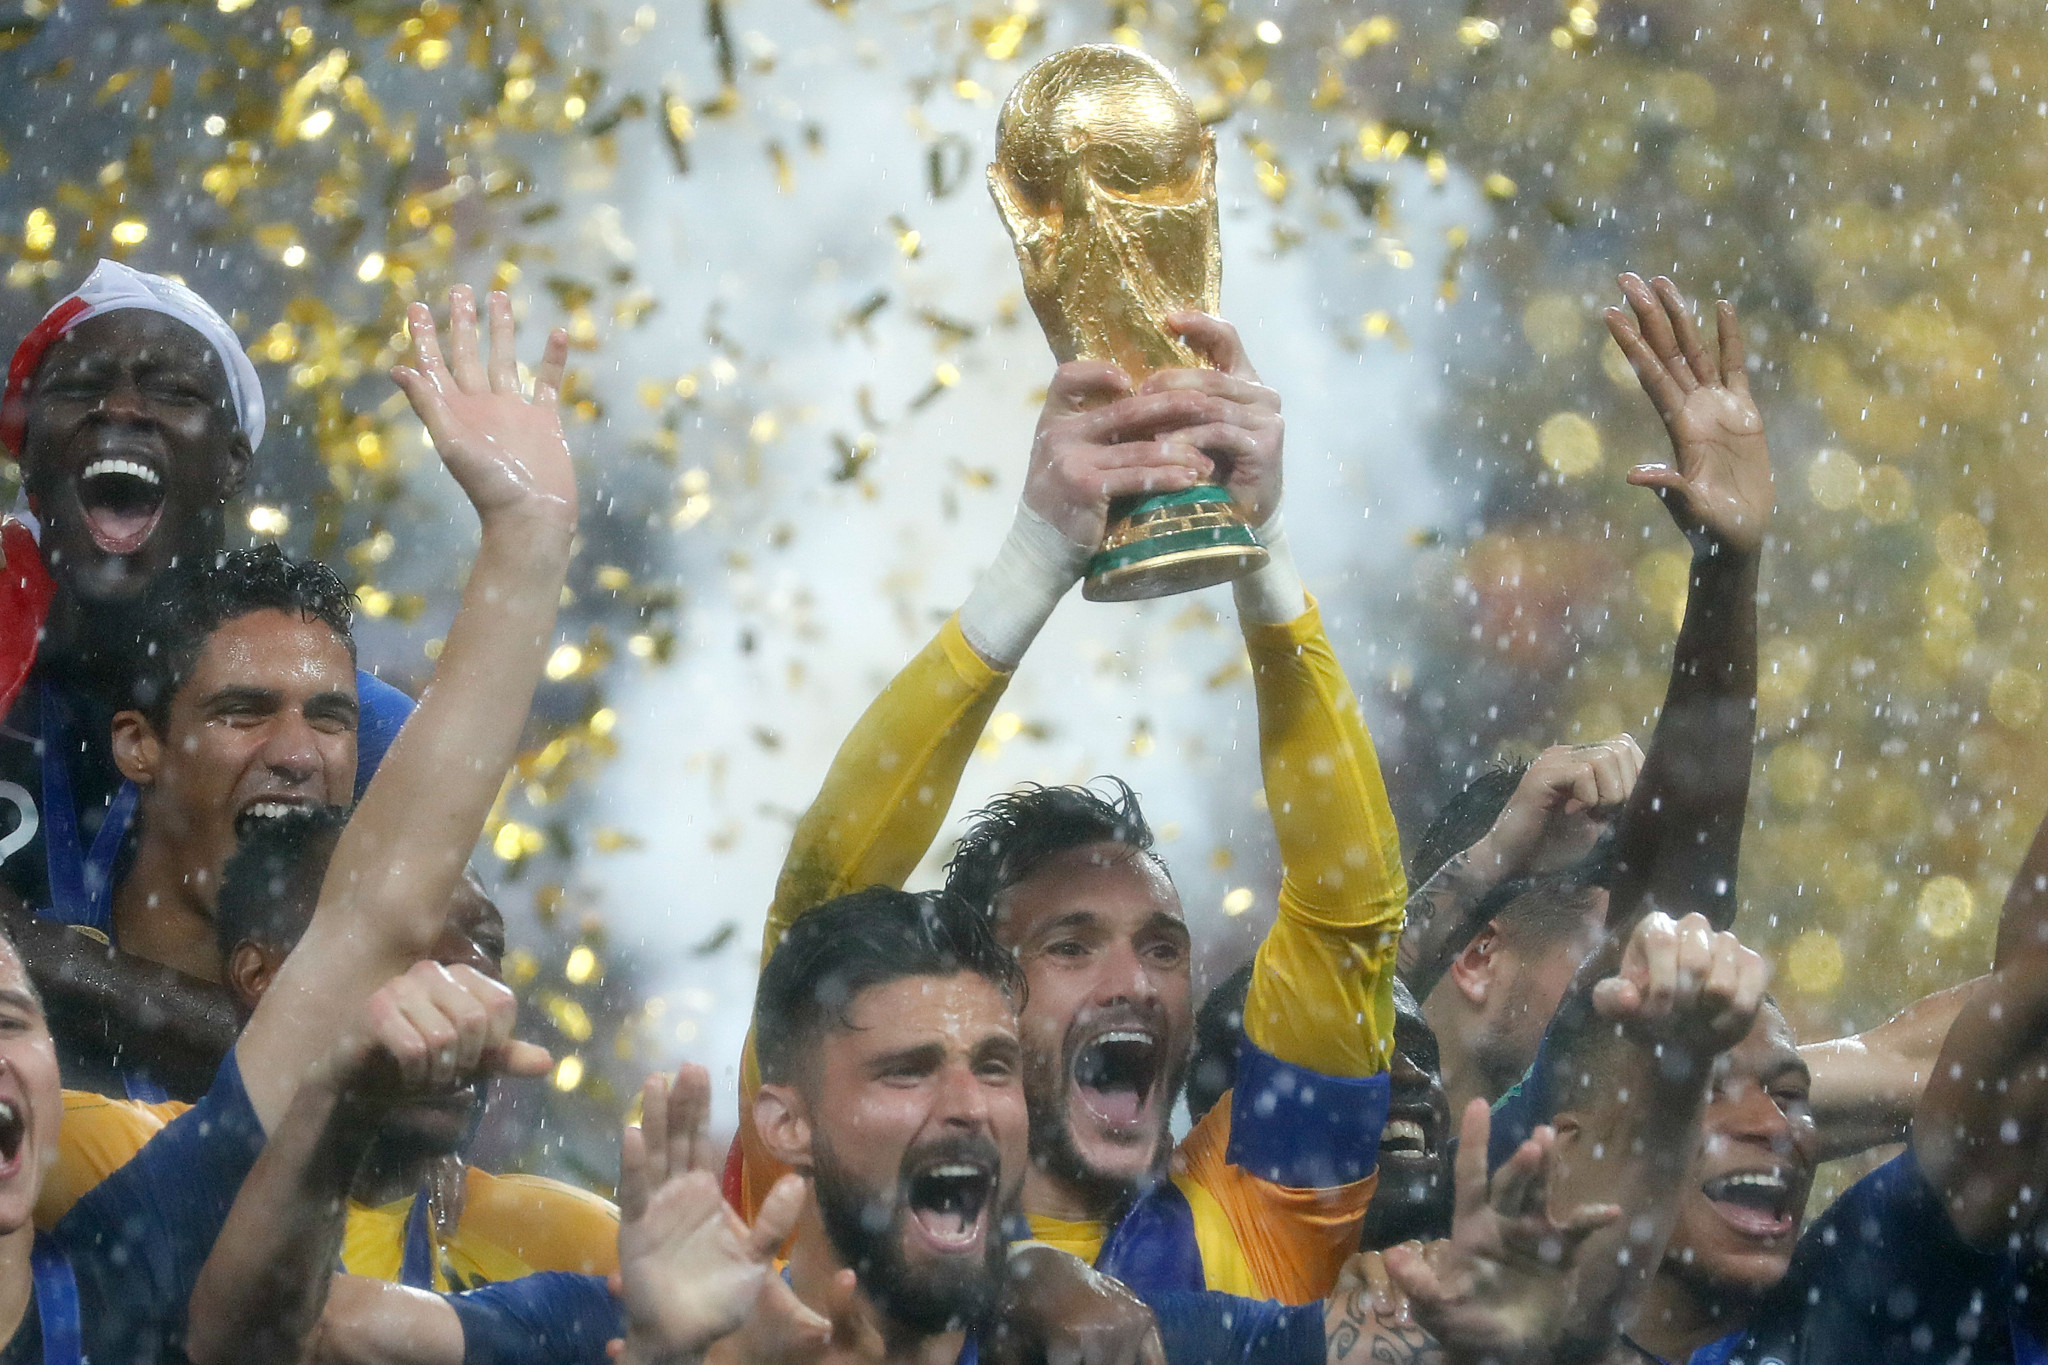 FIFA World Cup 2018: France beat Croatia 4-2 to lift trophy after 20 years